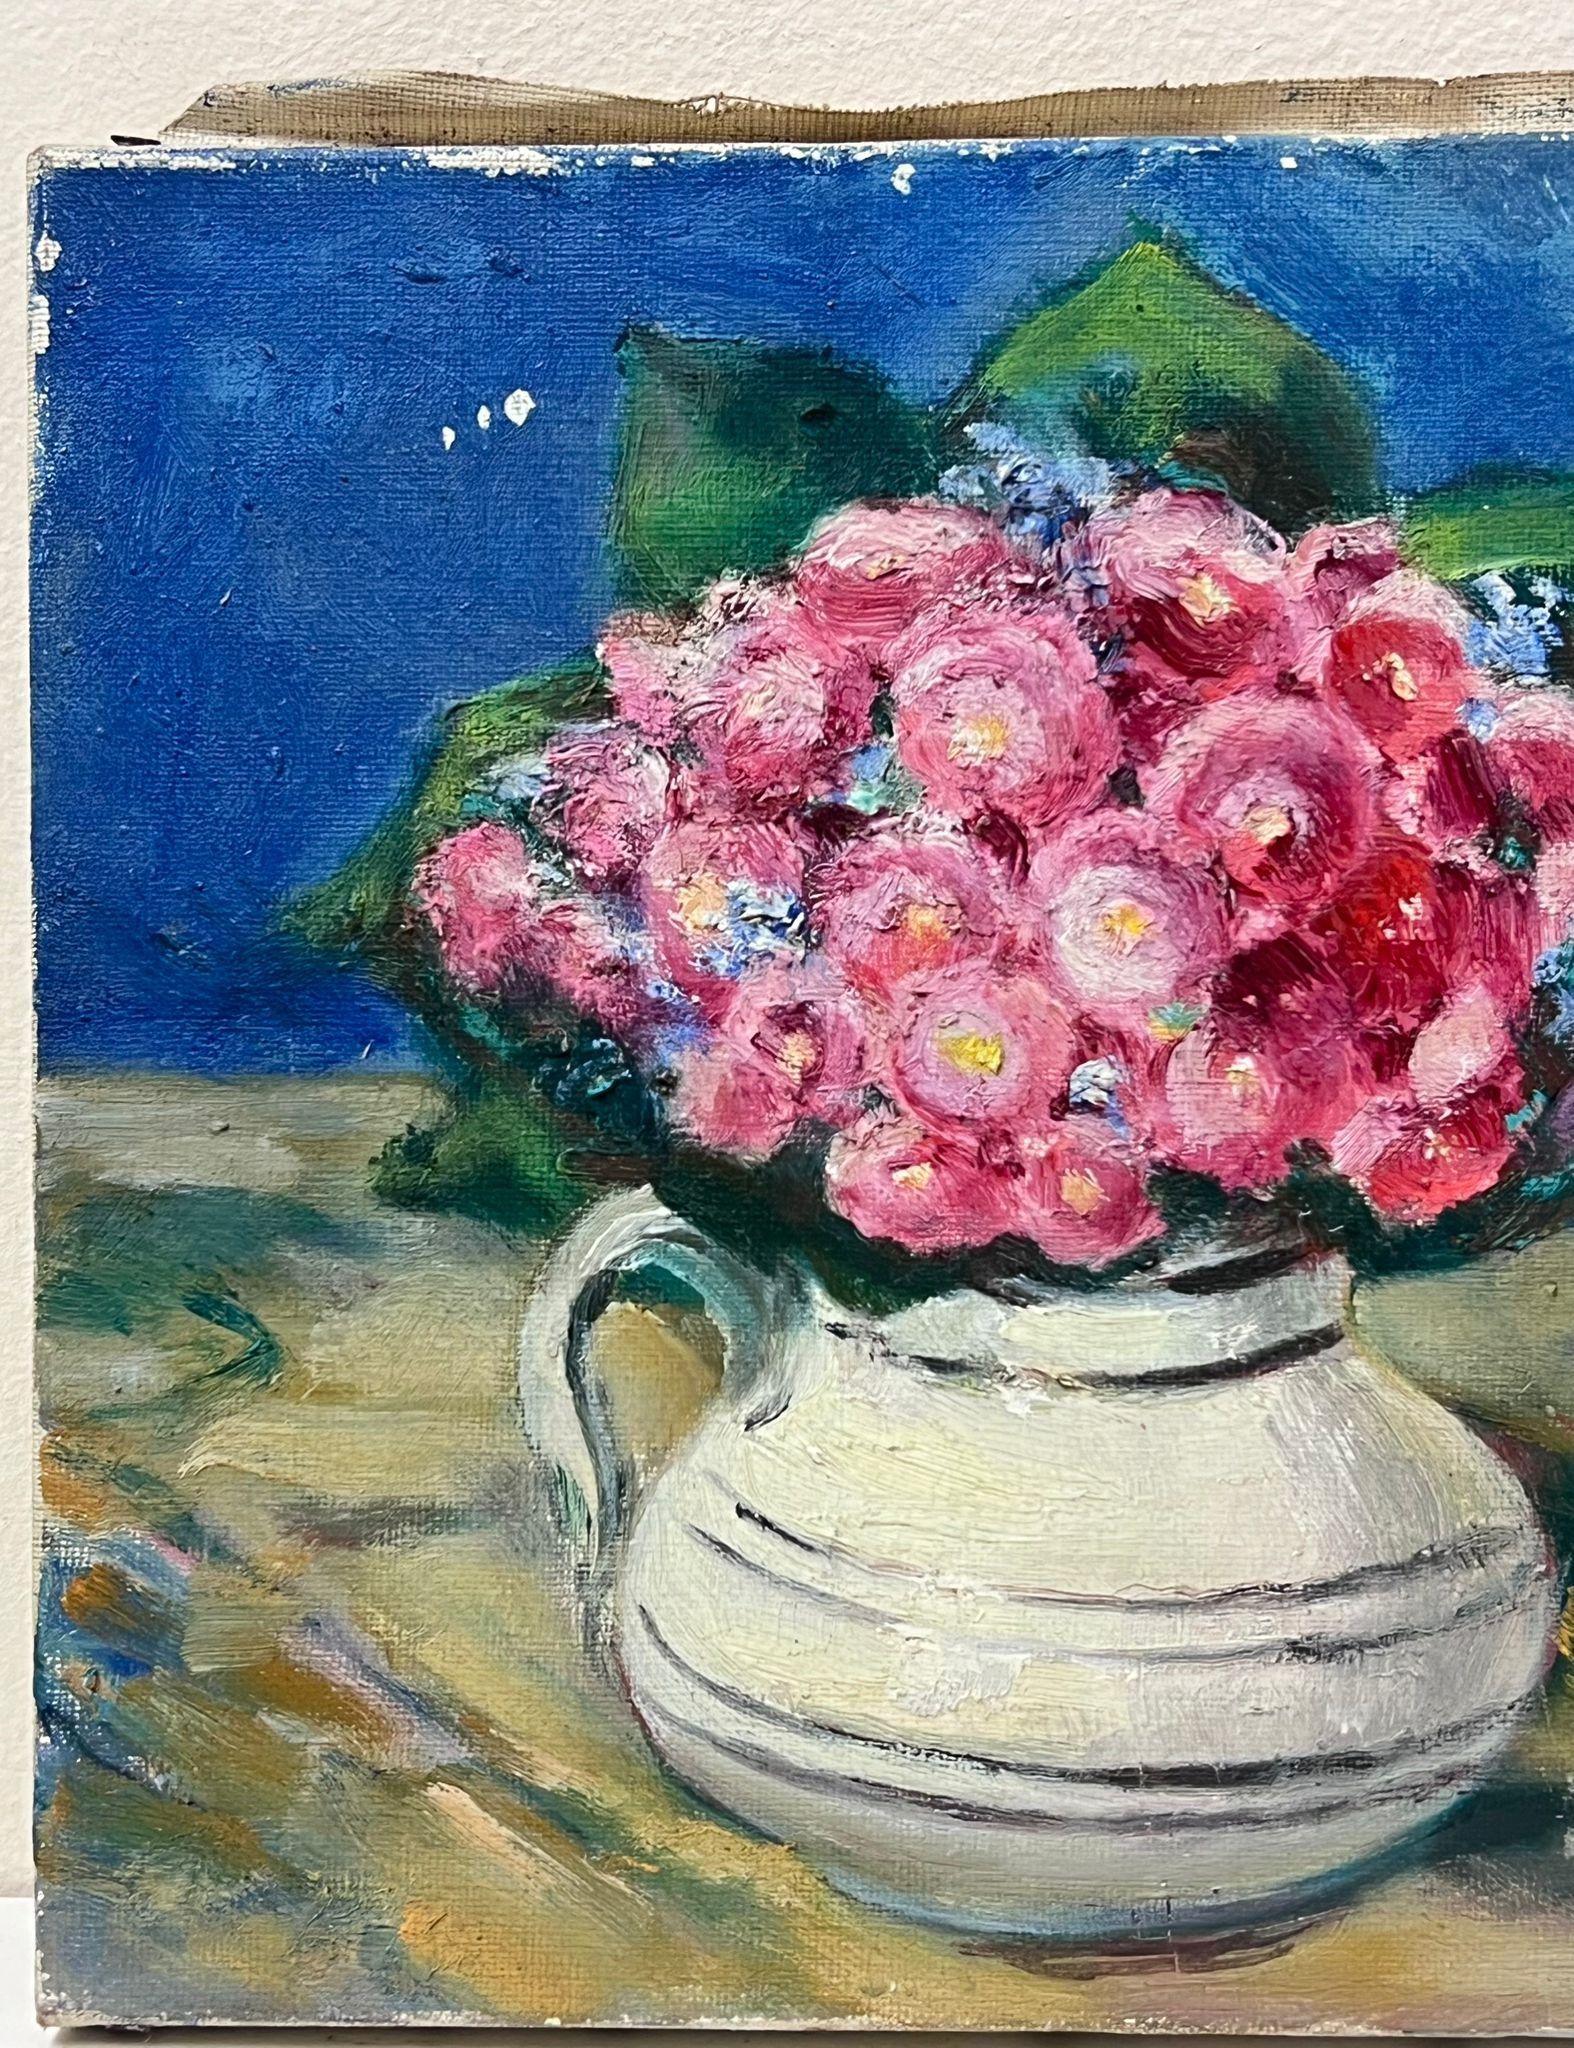 Flowers In Vase
signed by Louise Alix, French 1950's Impressionist 
oil on canvas
painting: 9 x 10.5 inches
provenance: from a large private collection of this artists work in Northern France
condition: original, good and sound condition 